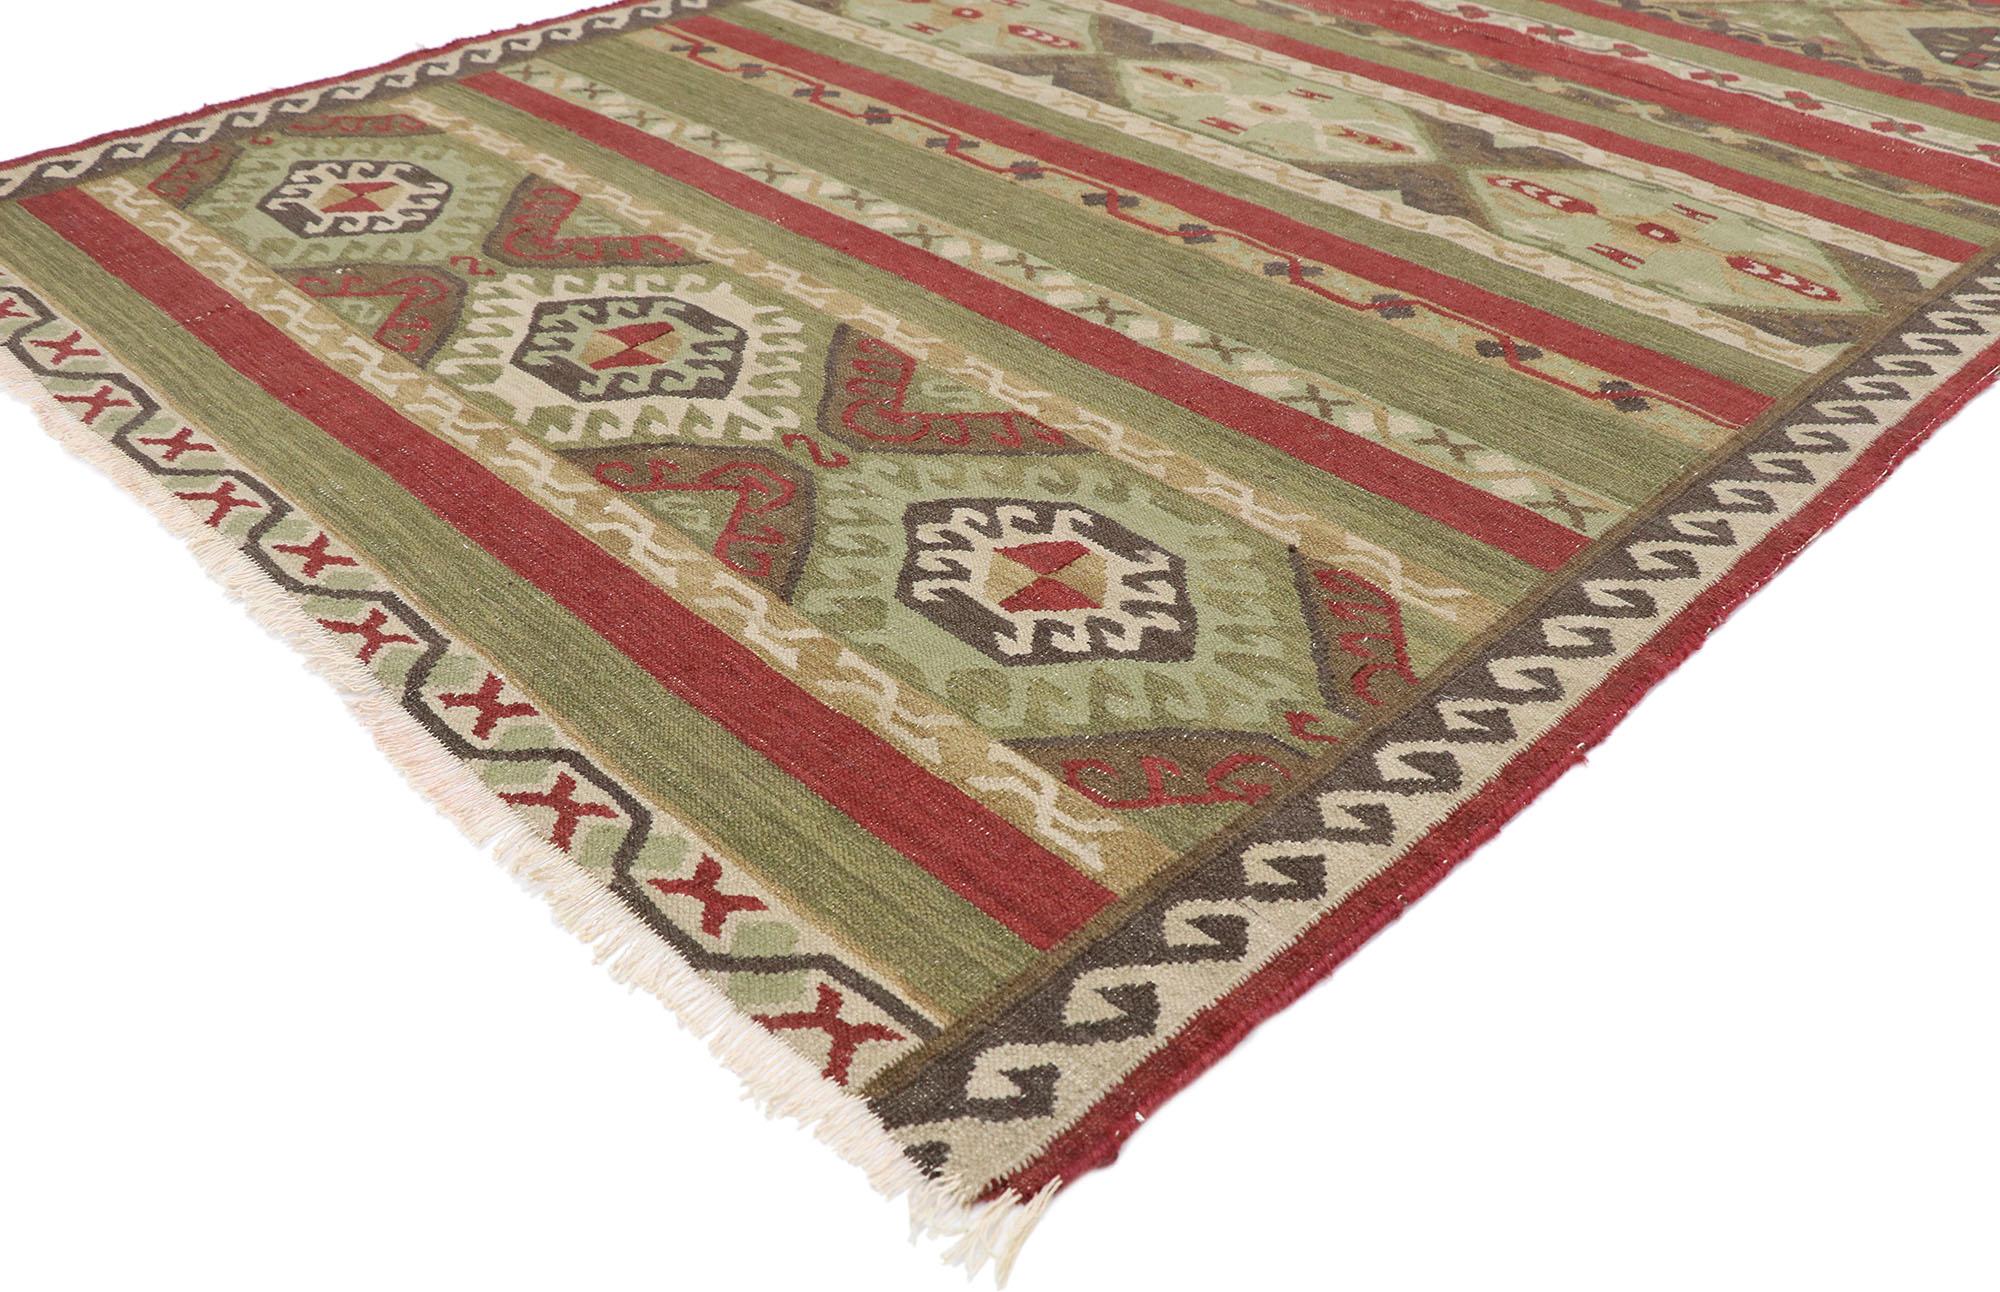 77482 Distressed Vintage Persian Shiraz kilim rug, 05'04 x 08'01. Full of tiny details and an expressive design combined with earth-tone colors, this hand-woven wool vintage Persian Shiraz kilim rug is a captivating vision of woven beauty. The